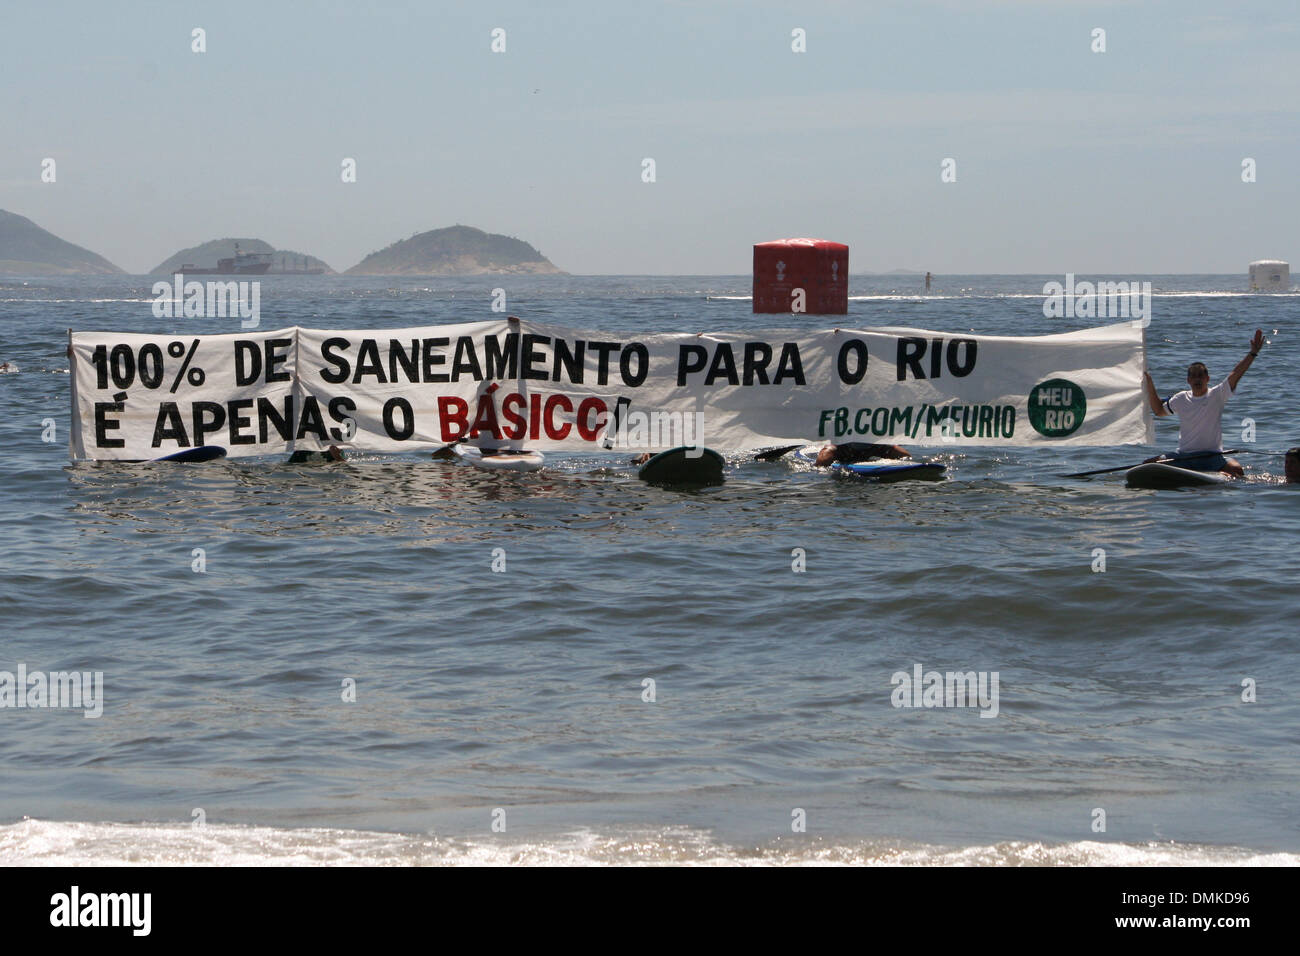 Copacabana Beach, Rio de Janeiro, Brazil, 14th Dec 2013. Activists of the 'Verao do Saneamento' (Summer of Sanitation) campaign open a banner in the sea during the 'King and Queen of the Sea' open water swimming tournament. They ask for a governmental sanitation plan that encompasses all the city. Credit:  Maria Adelaide Silva/Alamy Live News Stock Photo